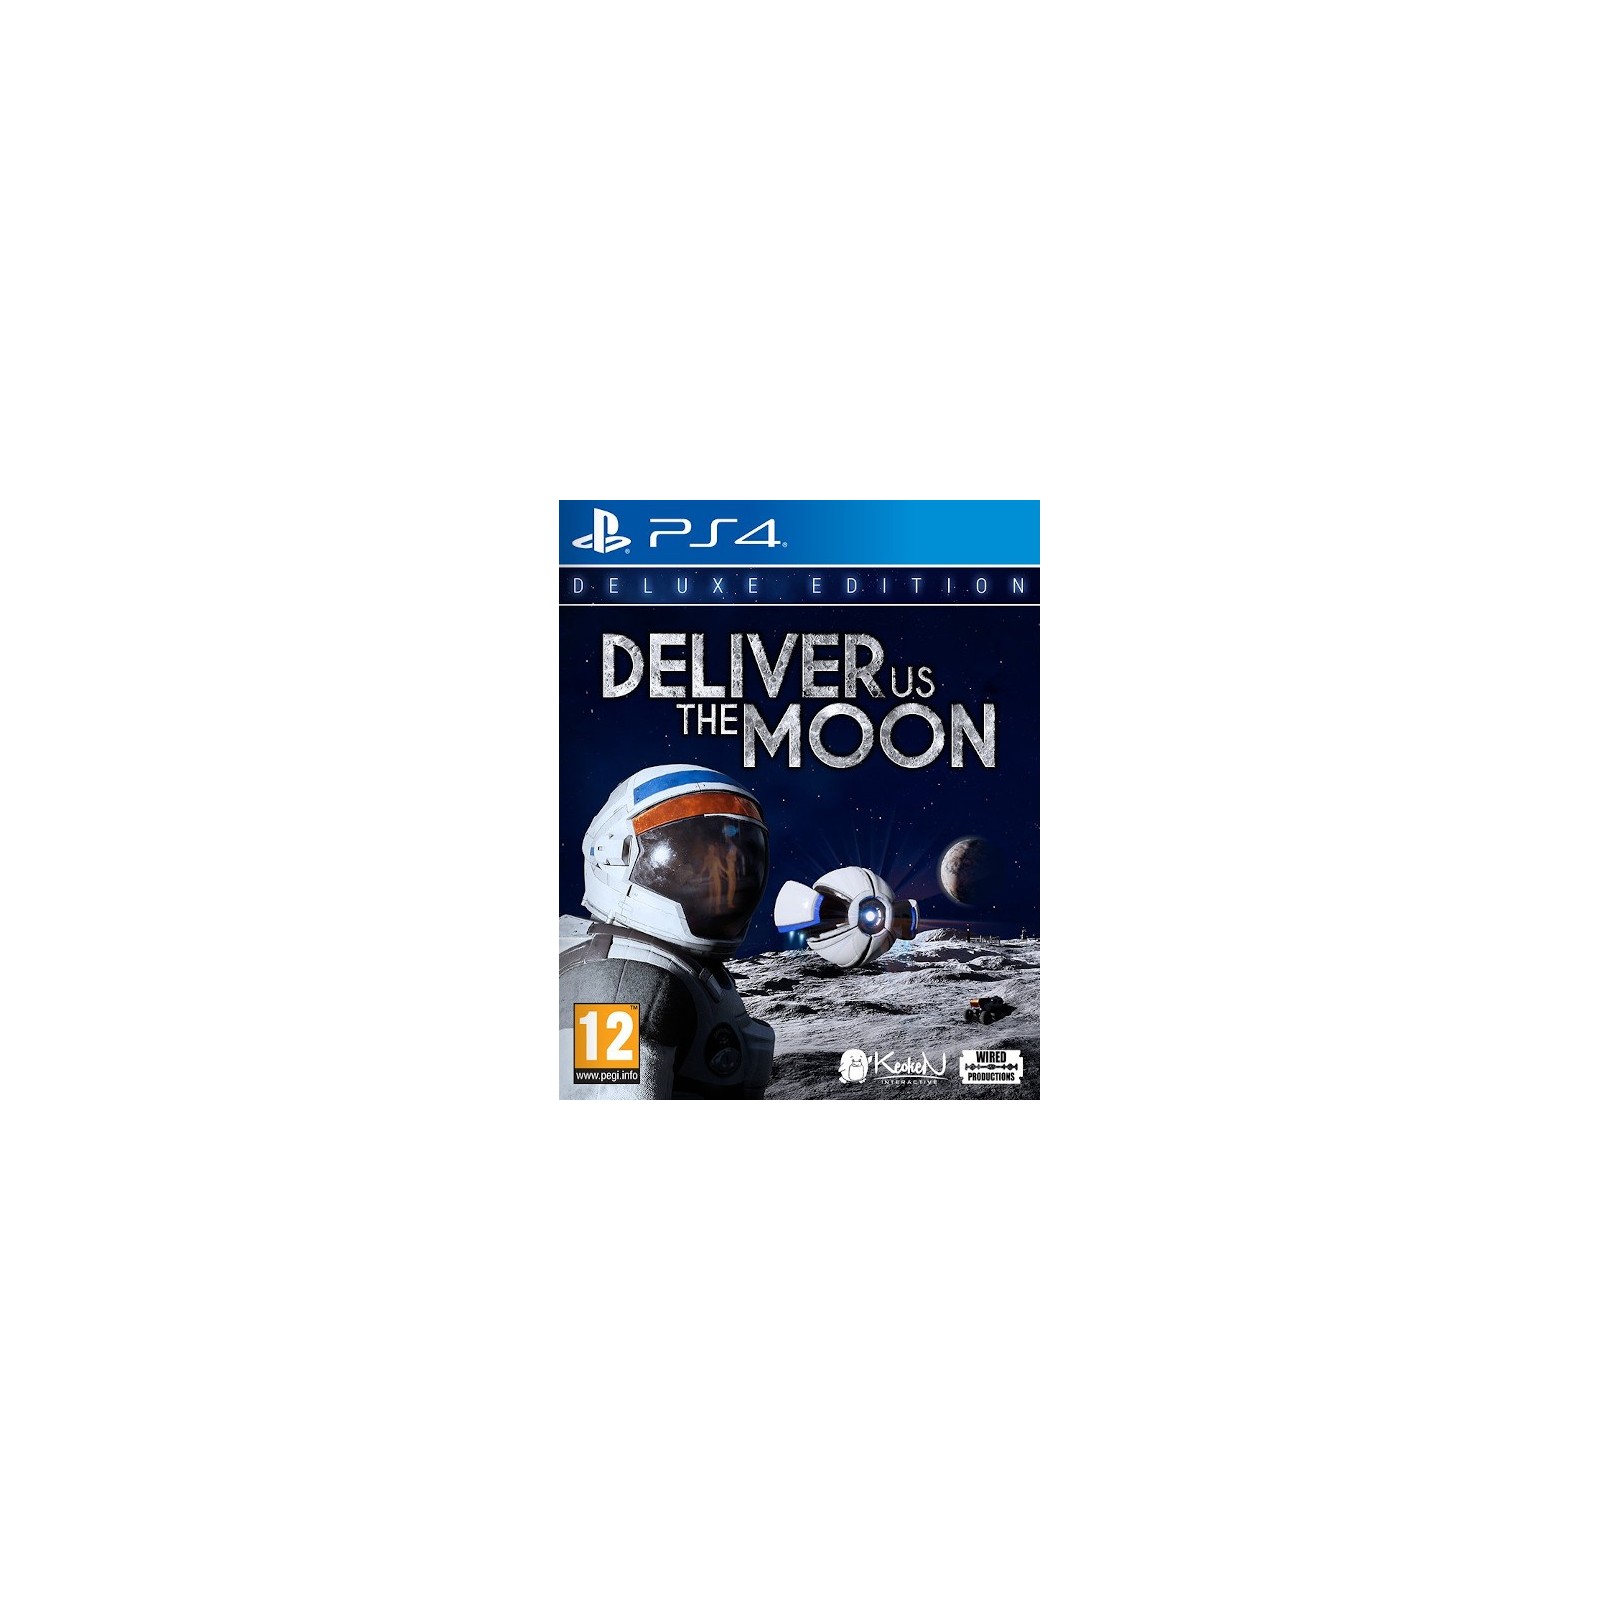 DELIVER US THE MOON: DELUXE EDITION